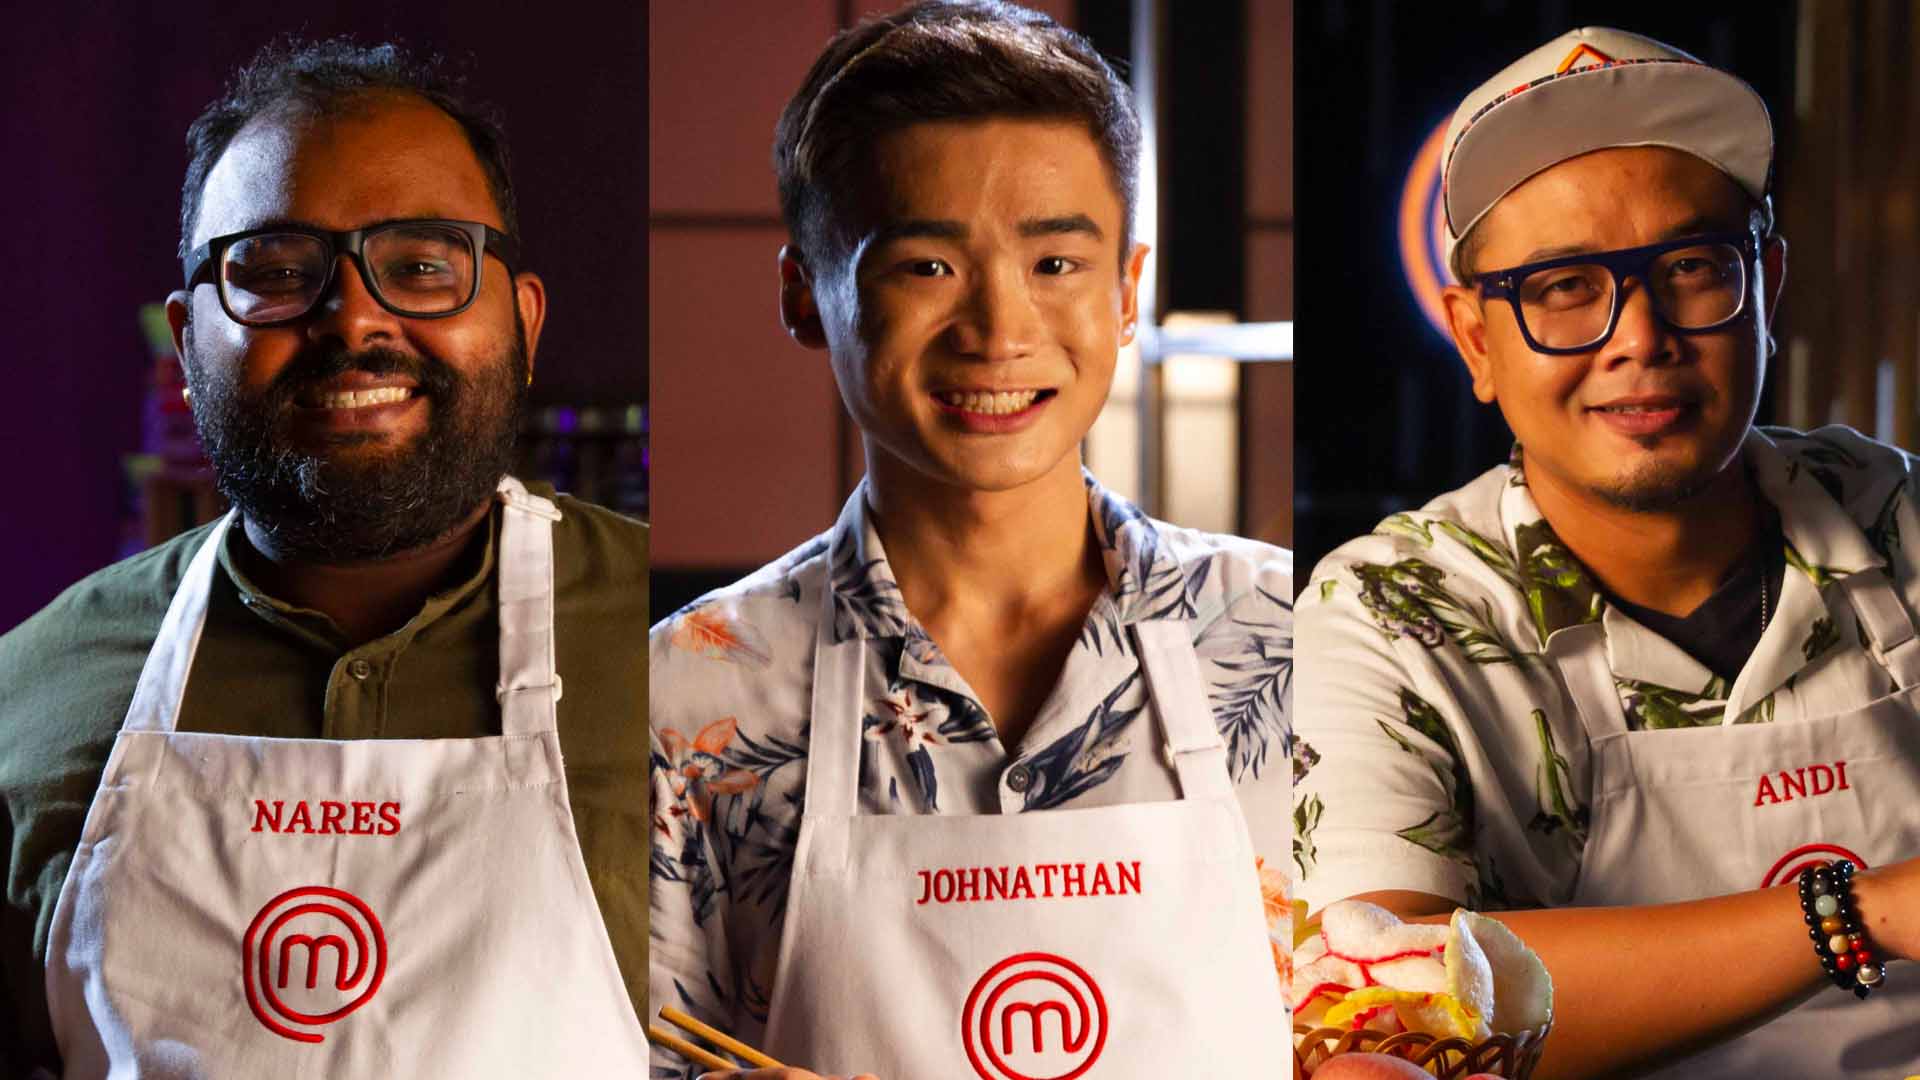 MasterChef Singapore Contestant, Who Impressed Judges With Elevated Malay  Cuisine, Reacts To Uncle Roger's Singapore Food Diss: “Negative People Need  Drama Like Oxygen” - 8days